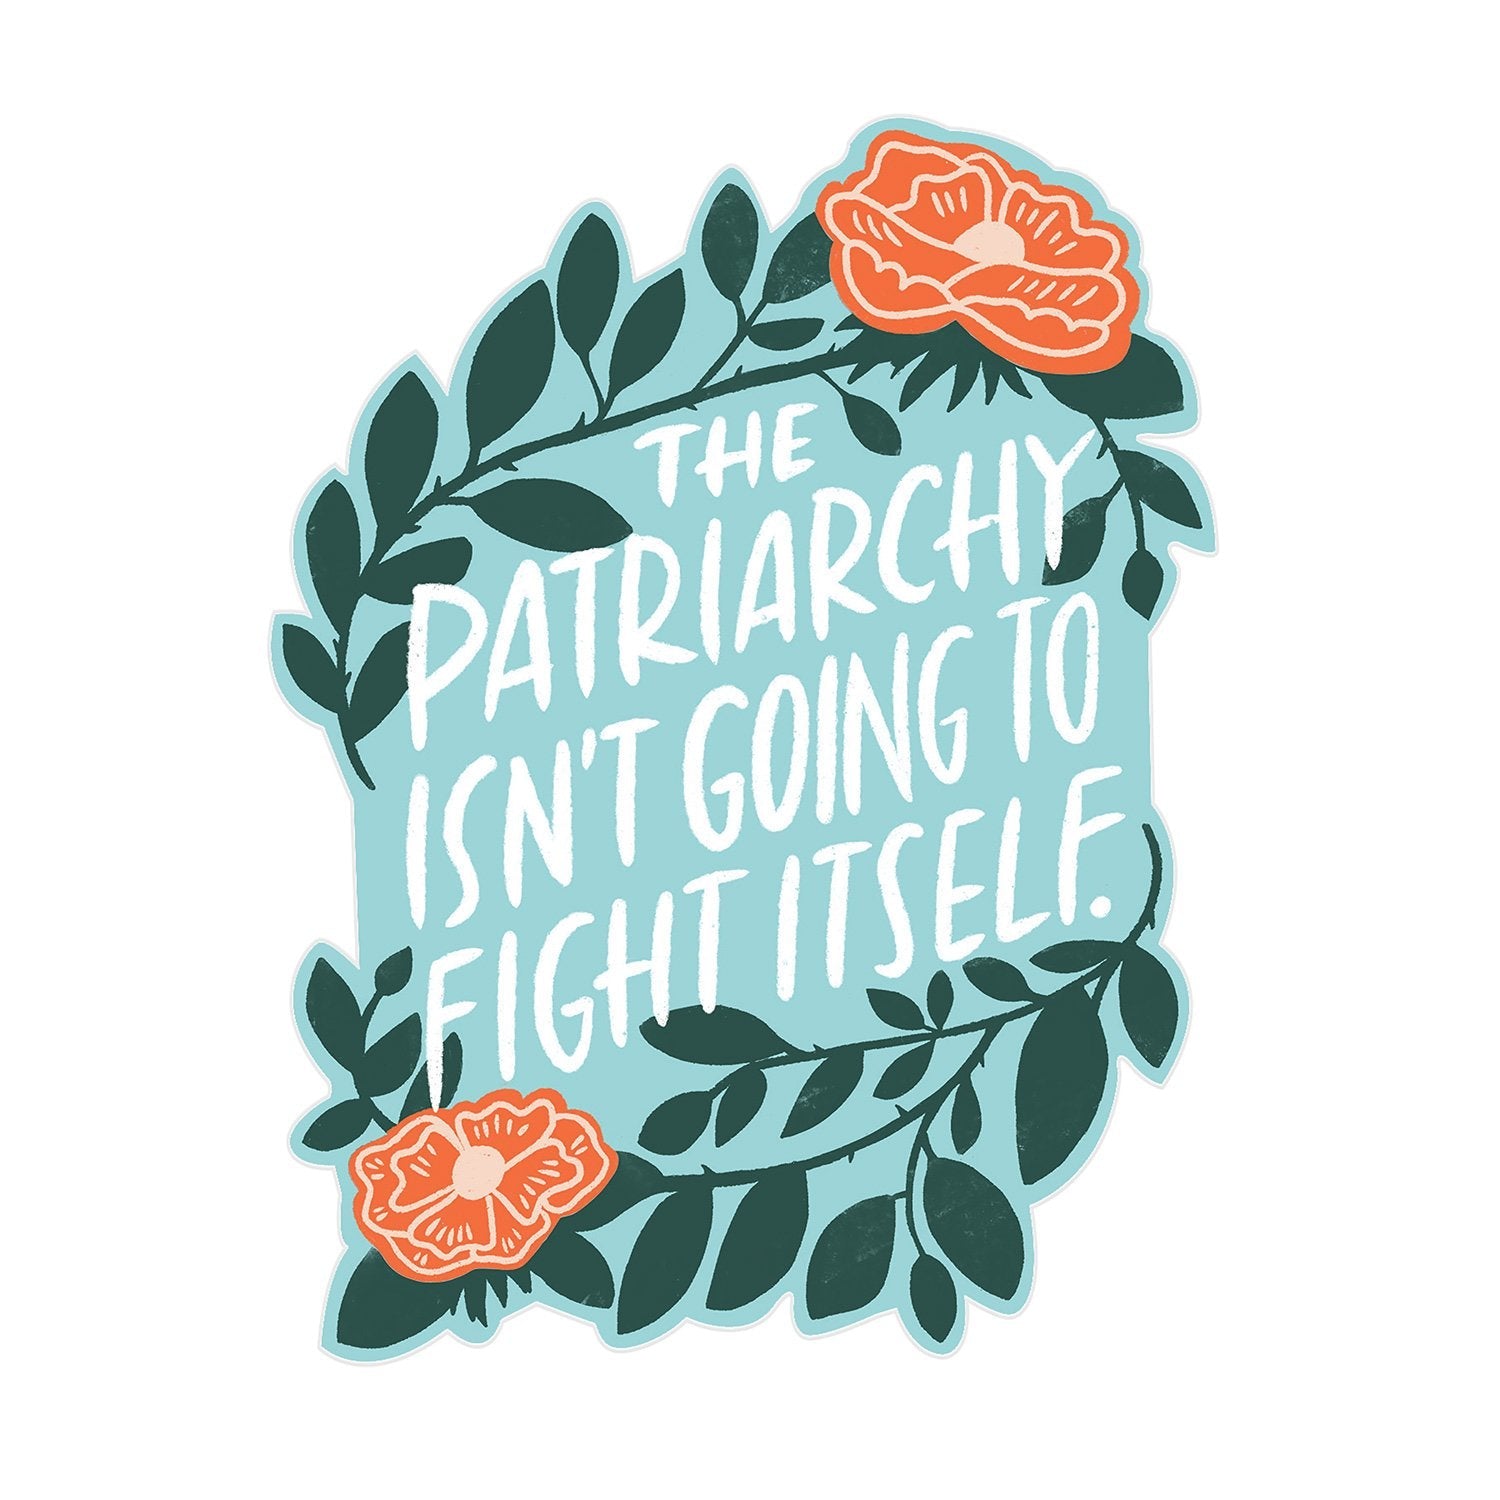 The Patriarchy Isn't Going To Fight Itself Sticker Greeting Card